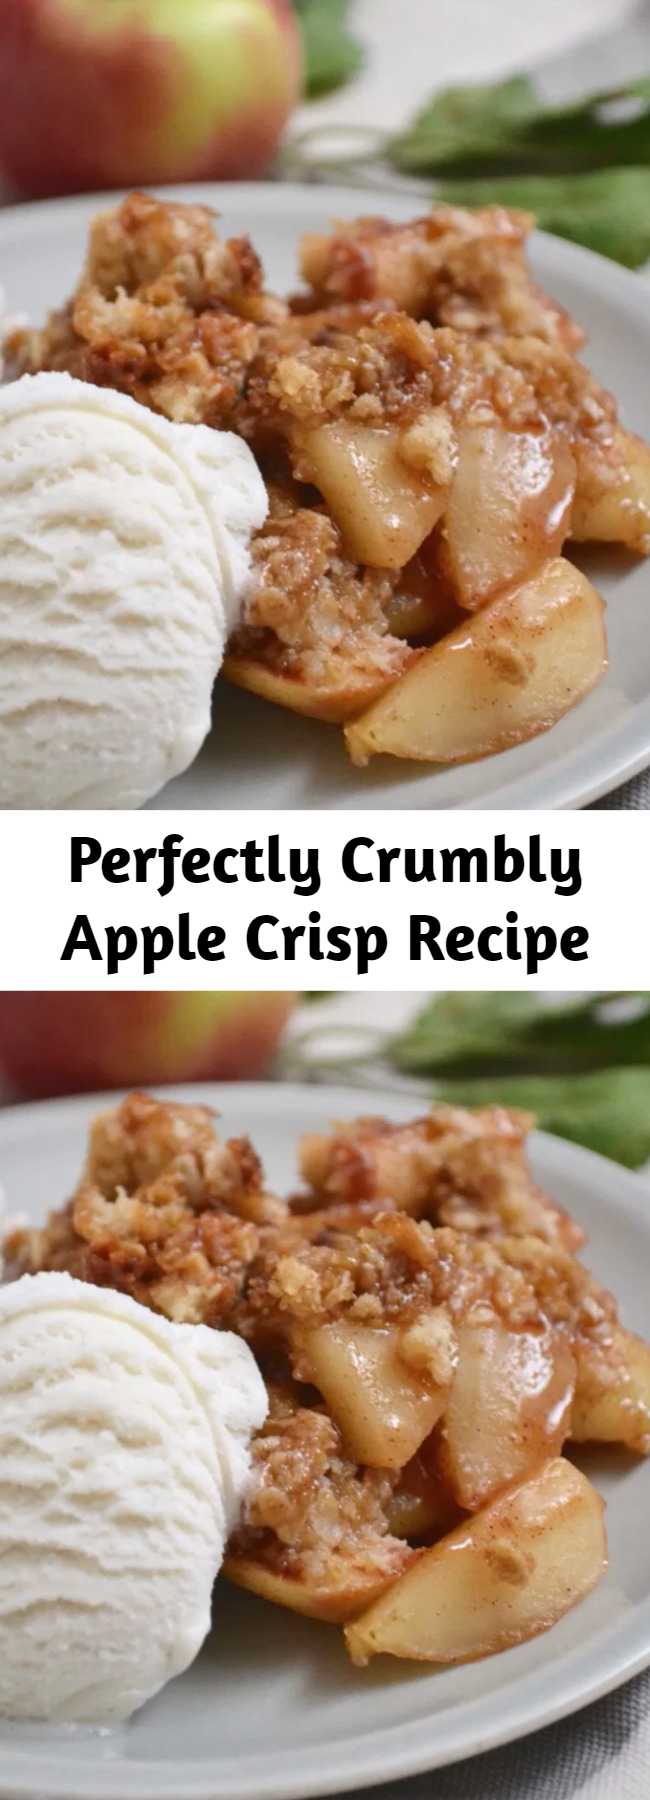 Perfectly Crumbly Apple Crisp Recipe - The topping on this apple crisp is packed with buttery, sugary, crumbly goodness. Apple crisp is the perfect fall dessert. Recipe includes modifications for different types of apples.